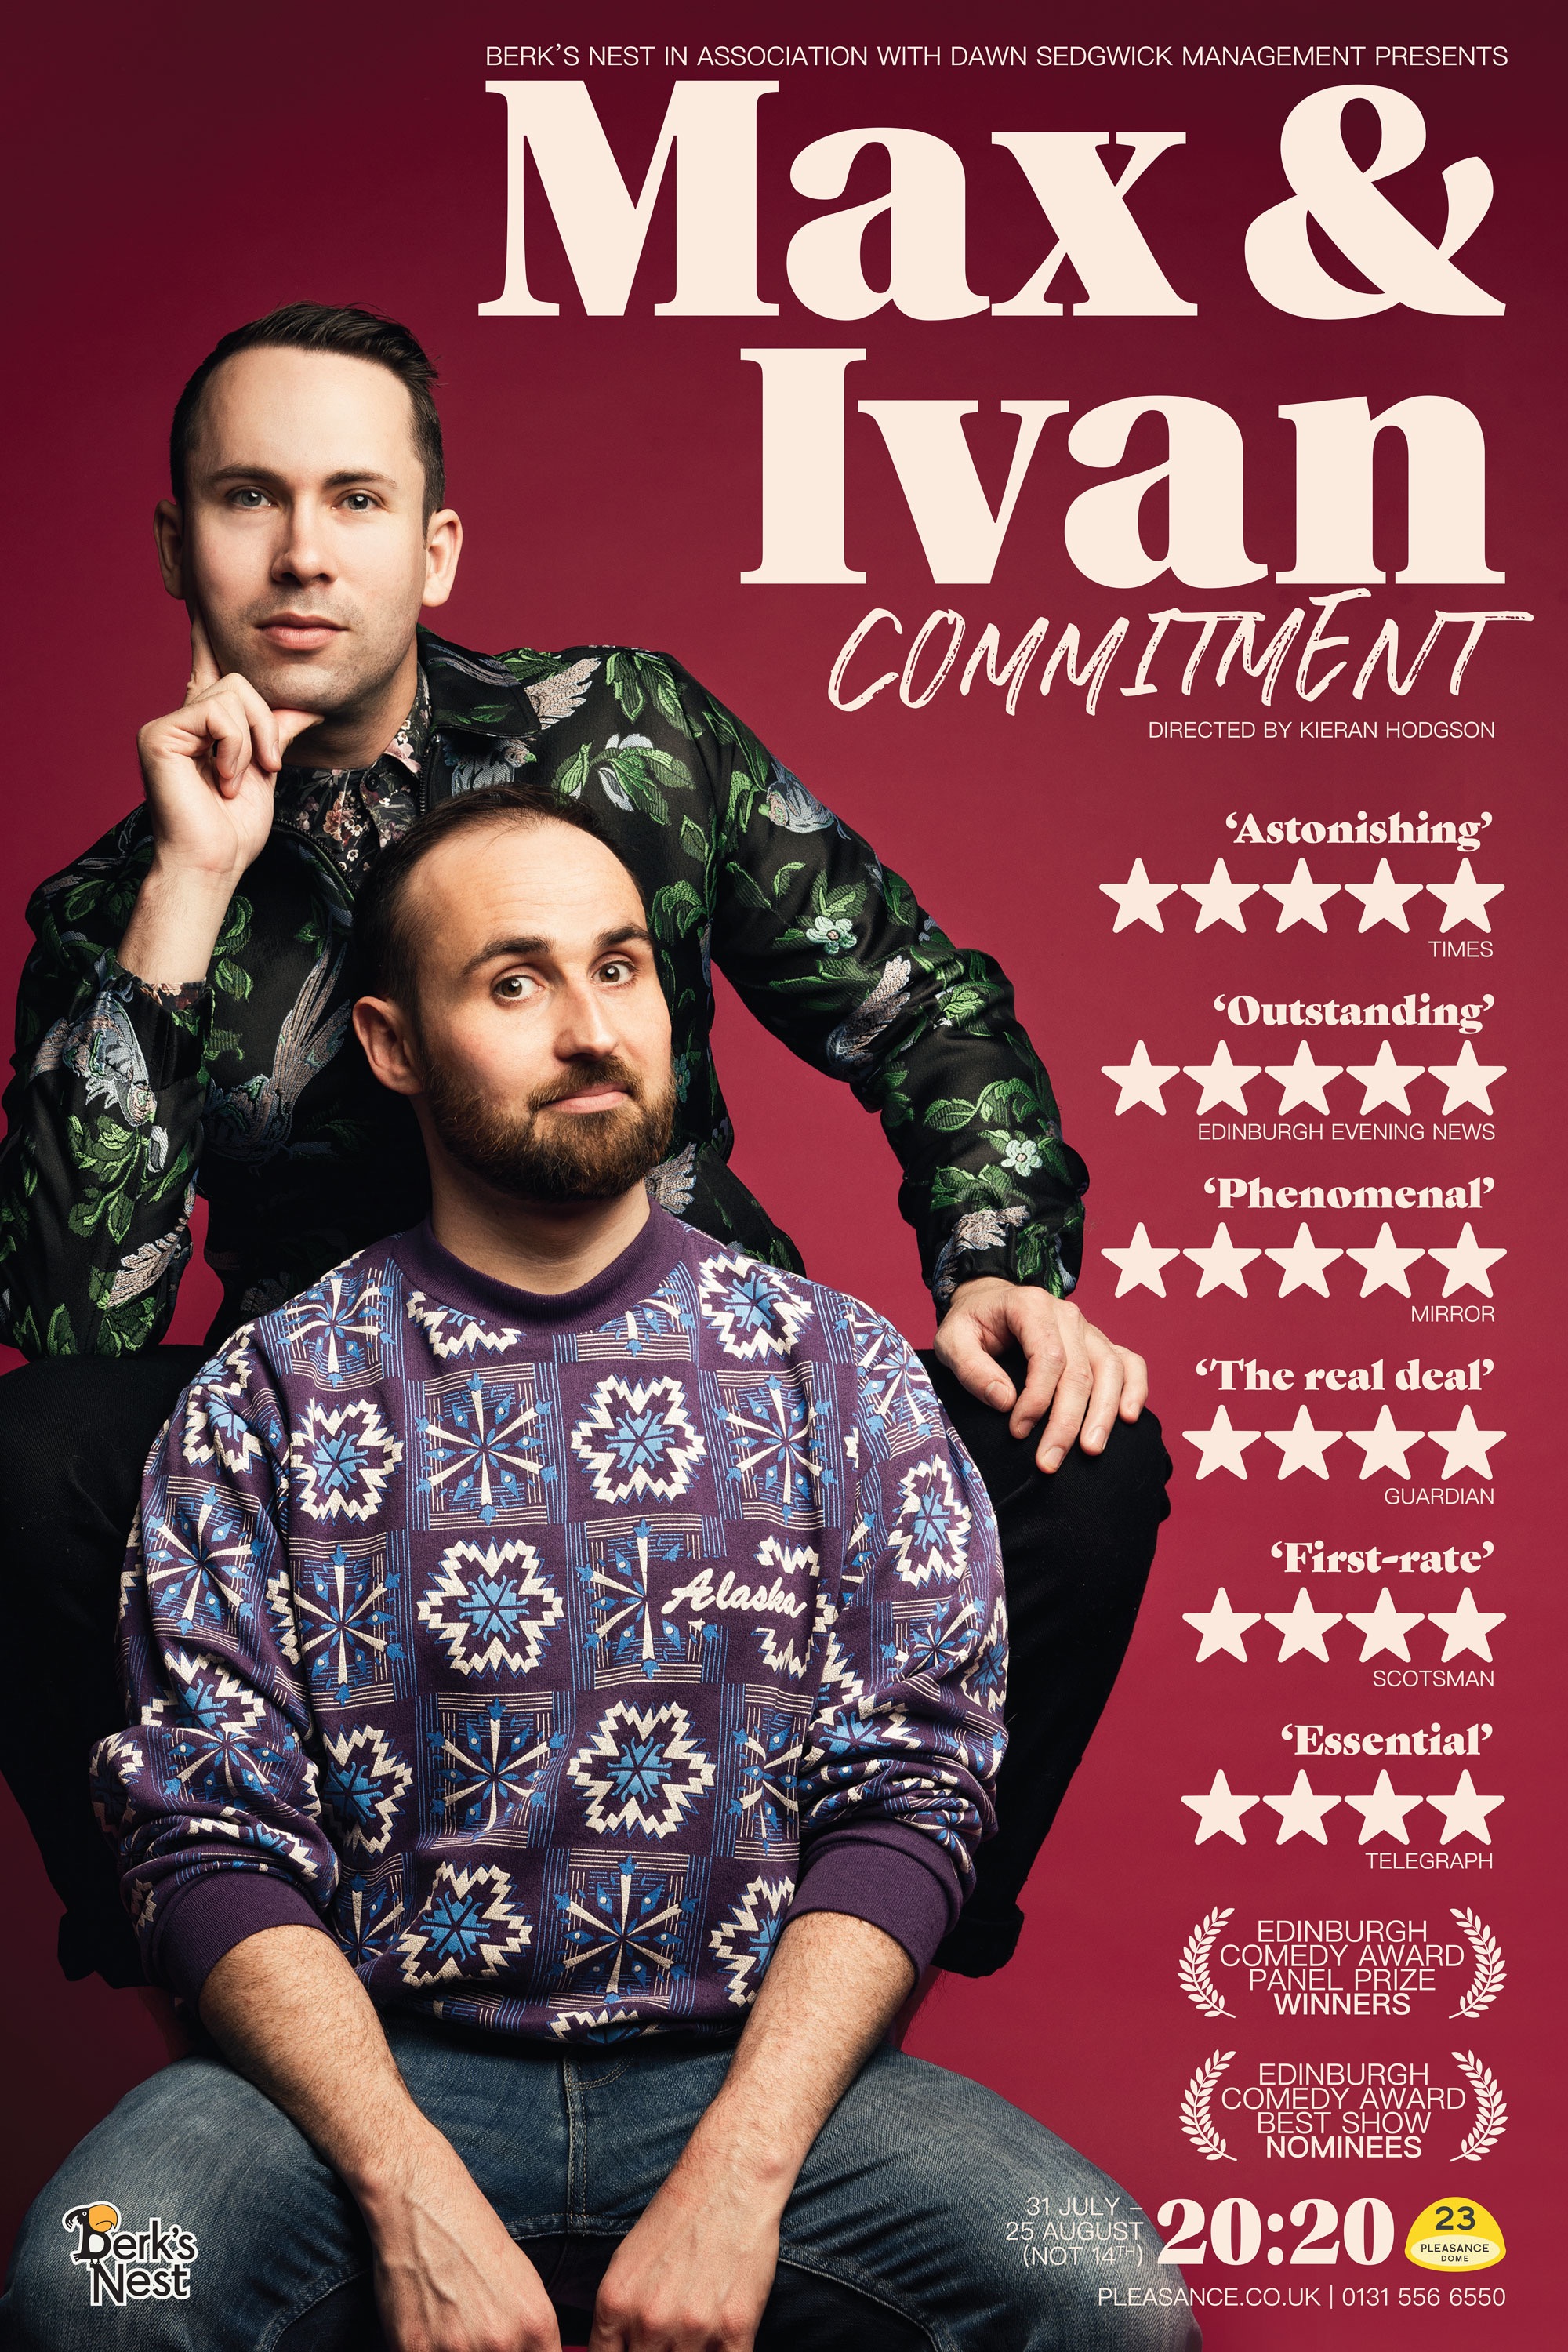 The poster for Max & Ivan: Commitment